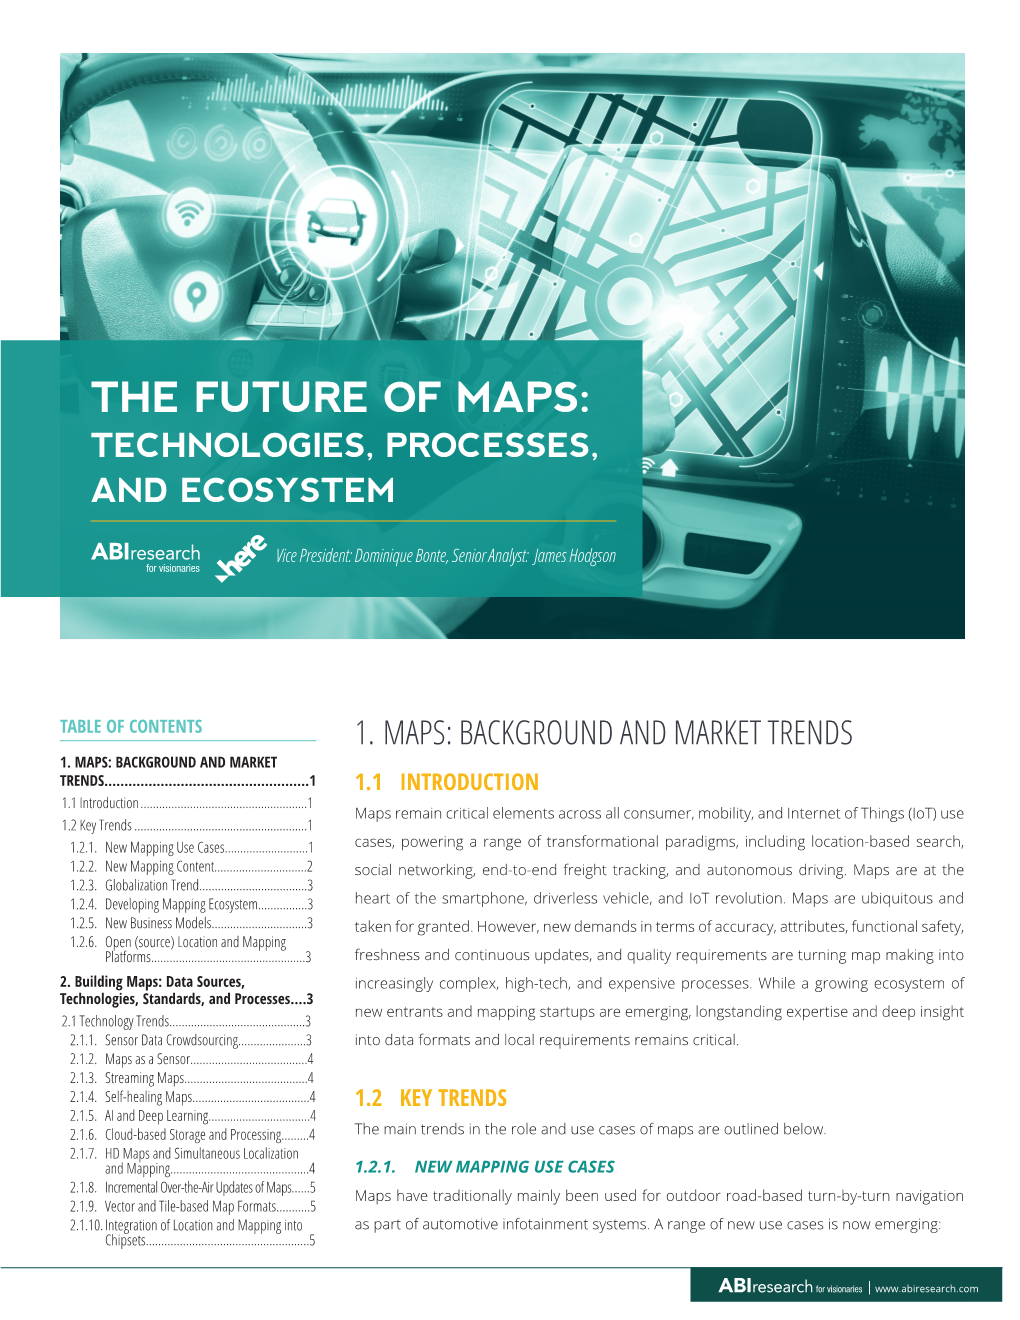 The Future of Maps: Technologies, Processes, and Ecosystem